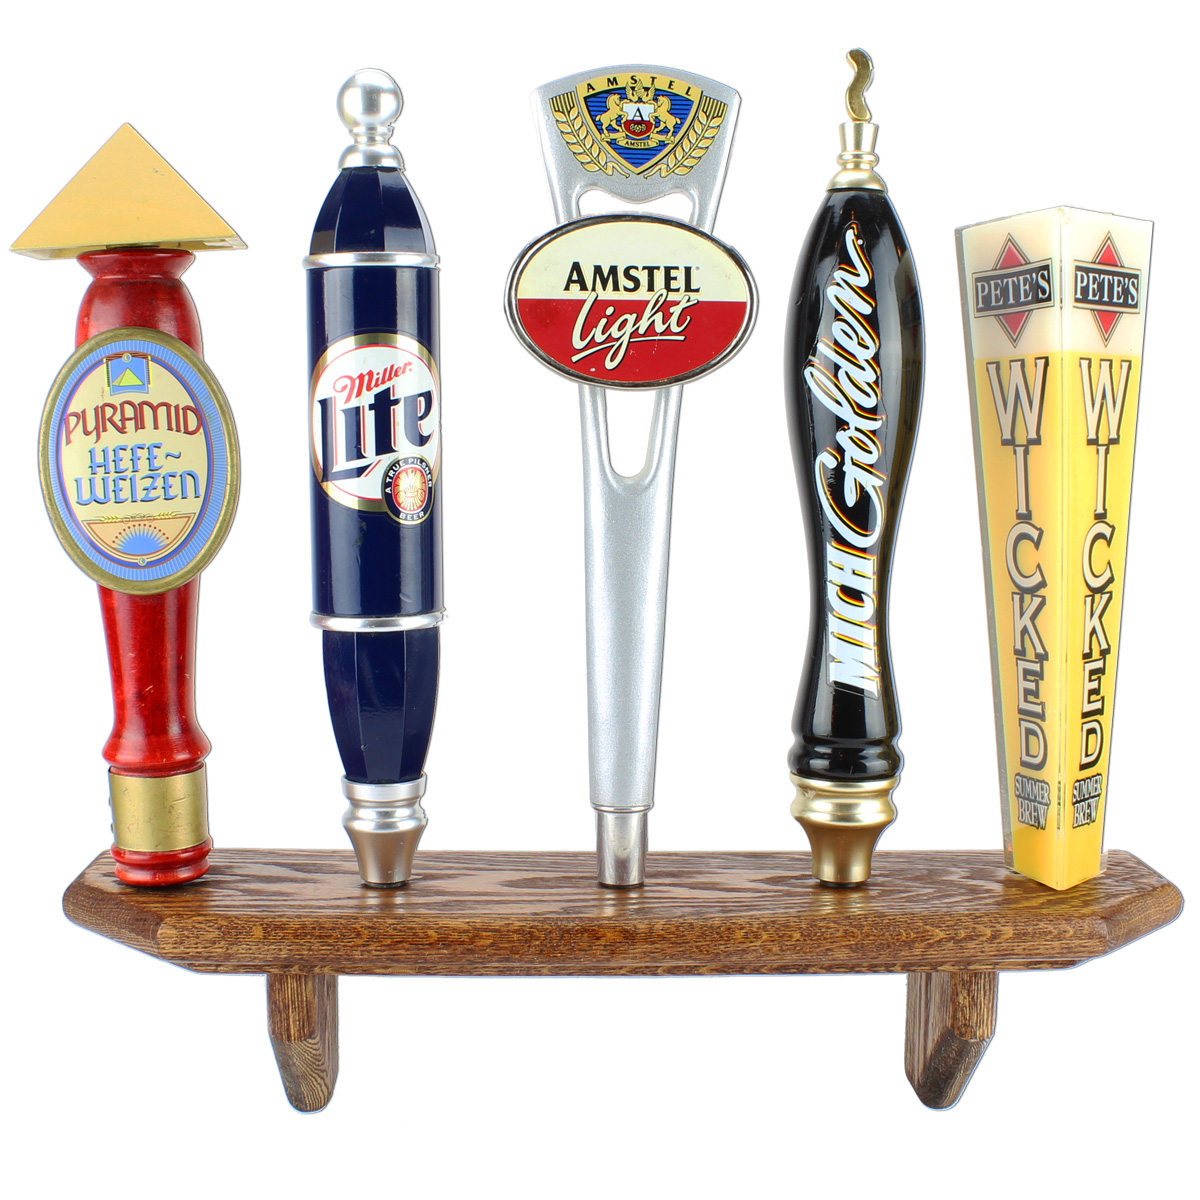 2 TIERS OF DISPLAY BEST  PRICE BLACK FINISH TAP HANDLE DISPLAY HOLDS 13 